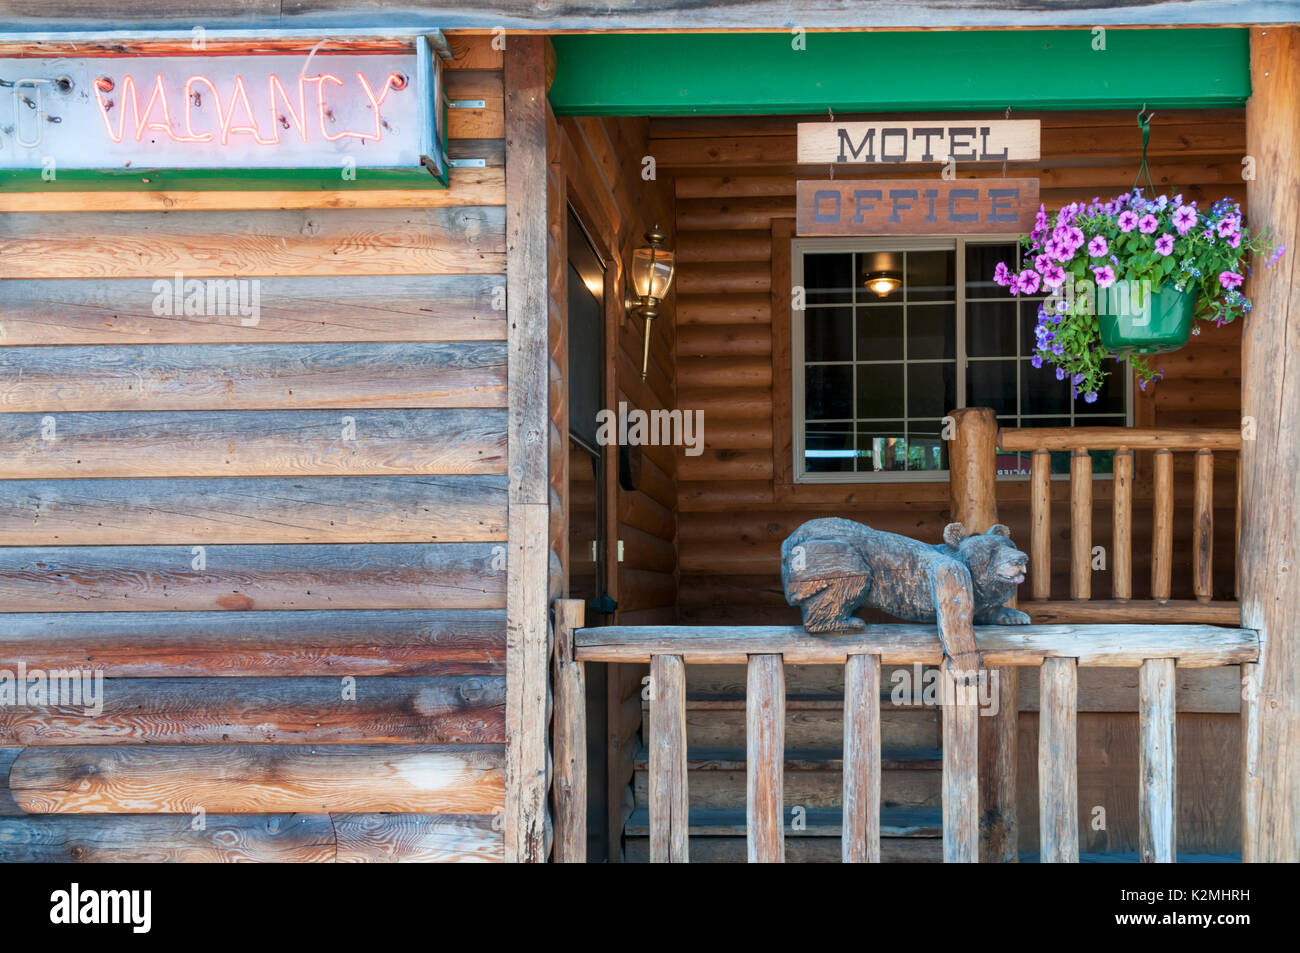 Wooden carving of a bear on entrance to motel in West Glacier, Montana, USA Stock Photo